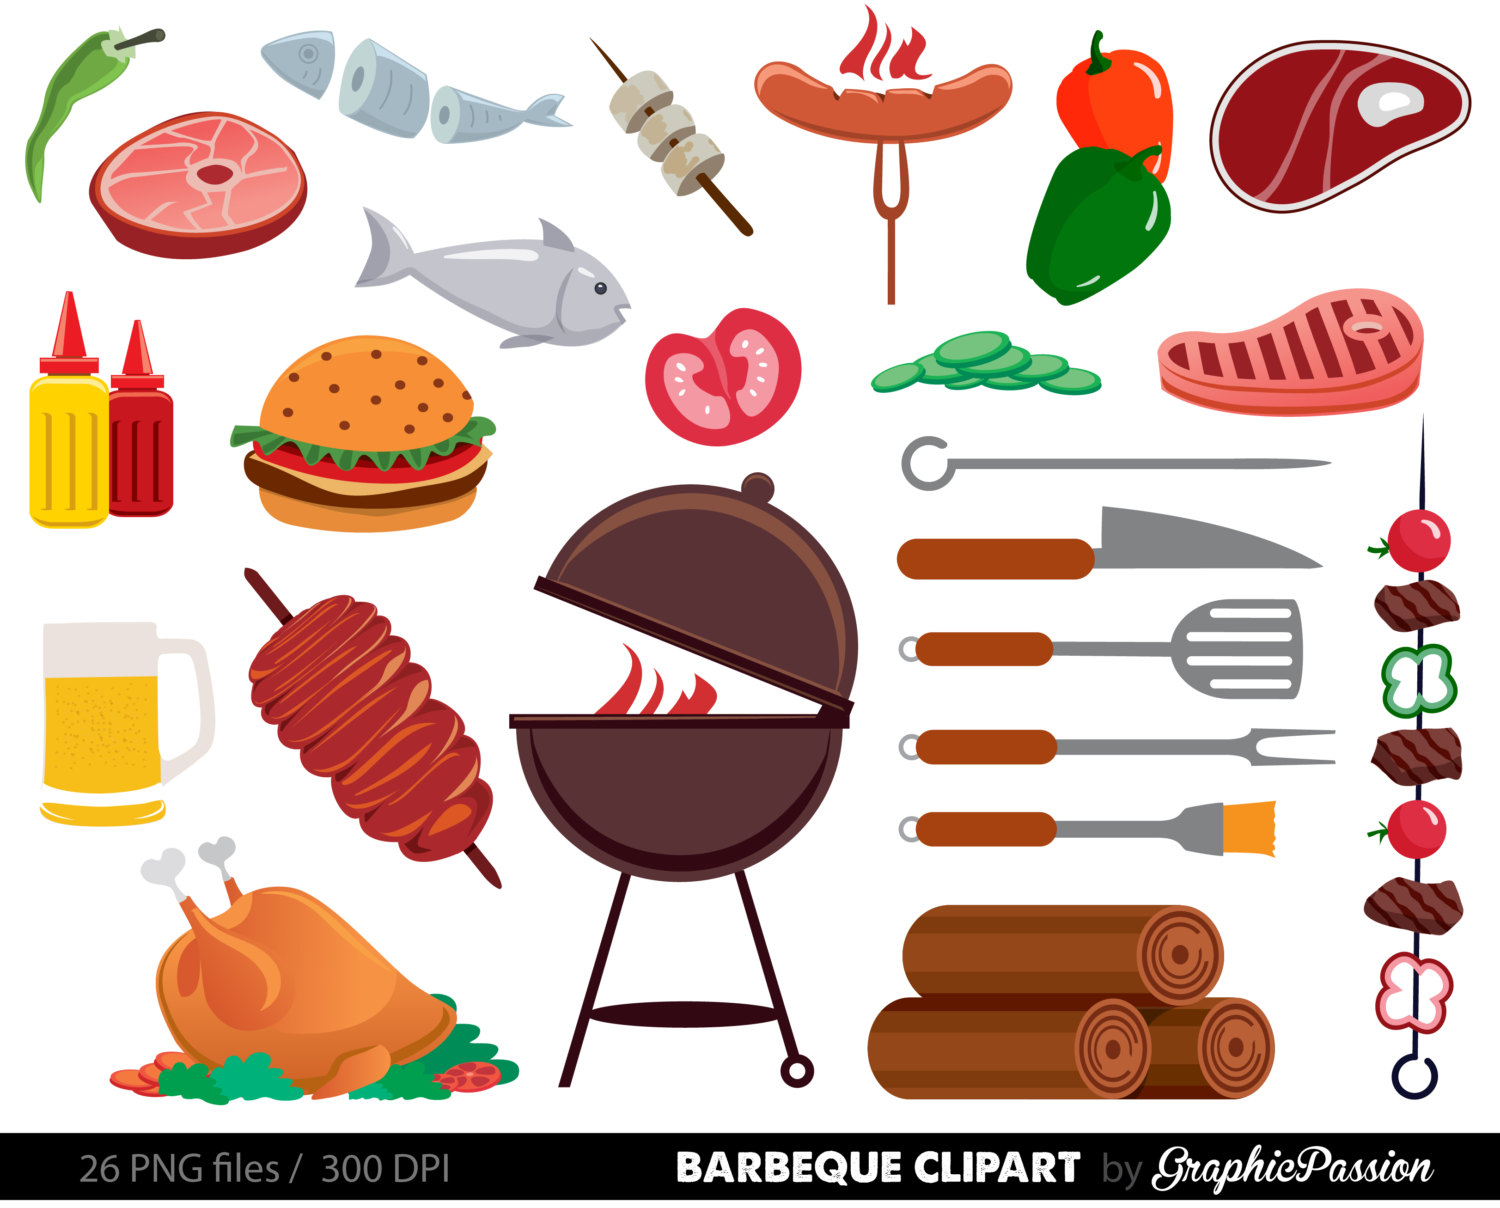 BBQ Clipart, Cookout Clipart, Barbeque Clipart, Party Food Clipart, Summer Clipart, Family Barbeque Clipart, Barbeque clipart barbecue BBQ